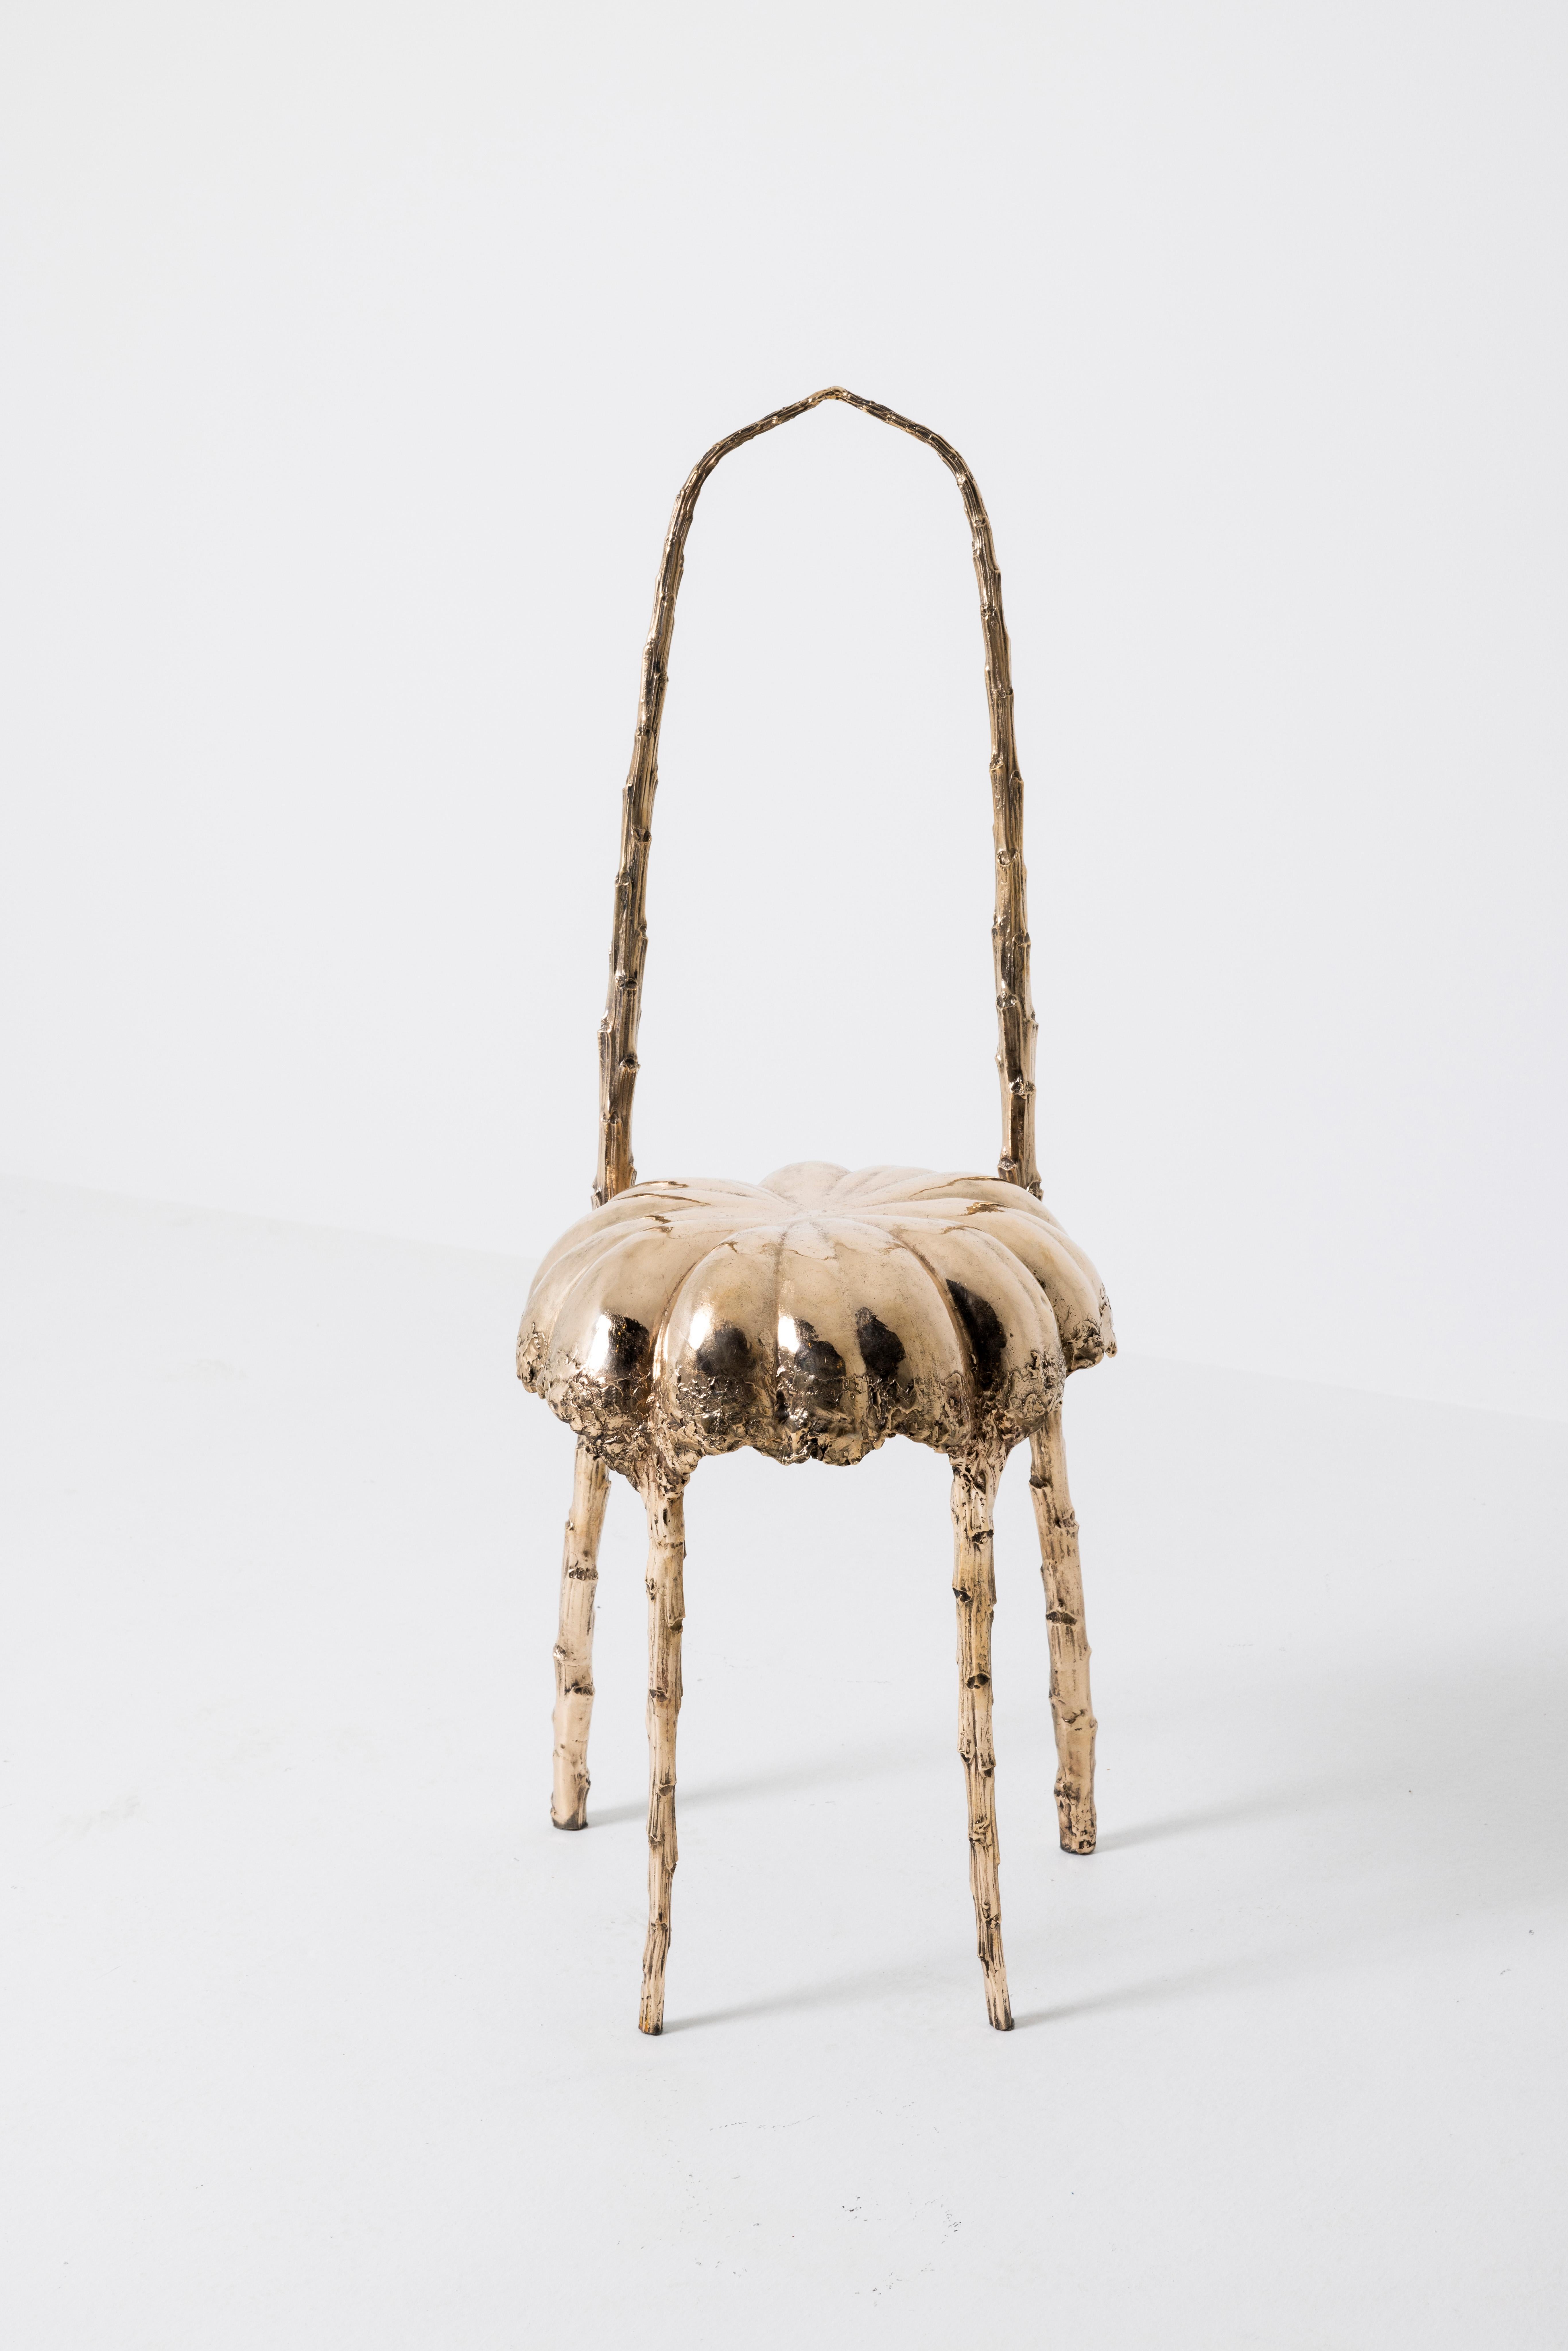 Belgian Contemporary Bronze Jellyfish Chair by Clotilde Ancarani For Sale